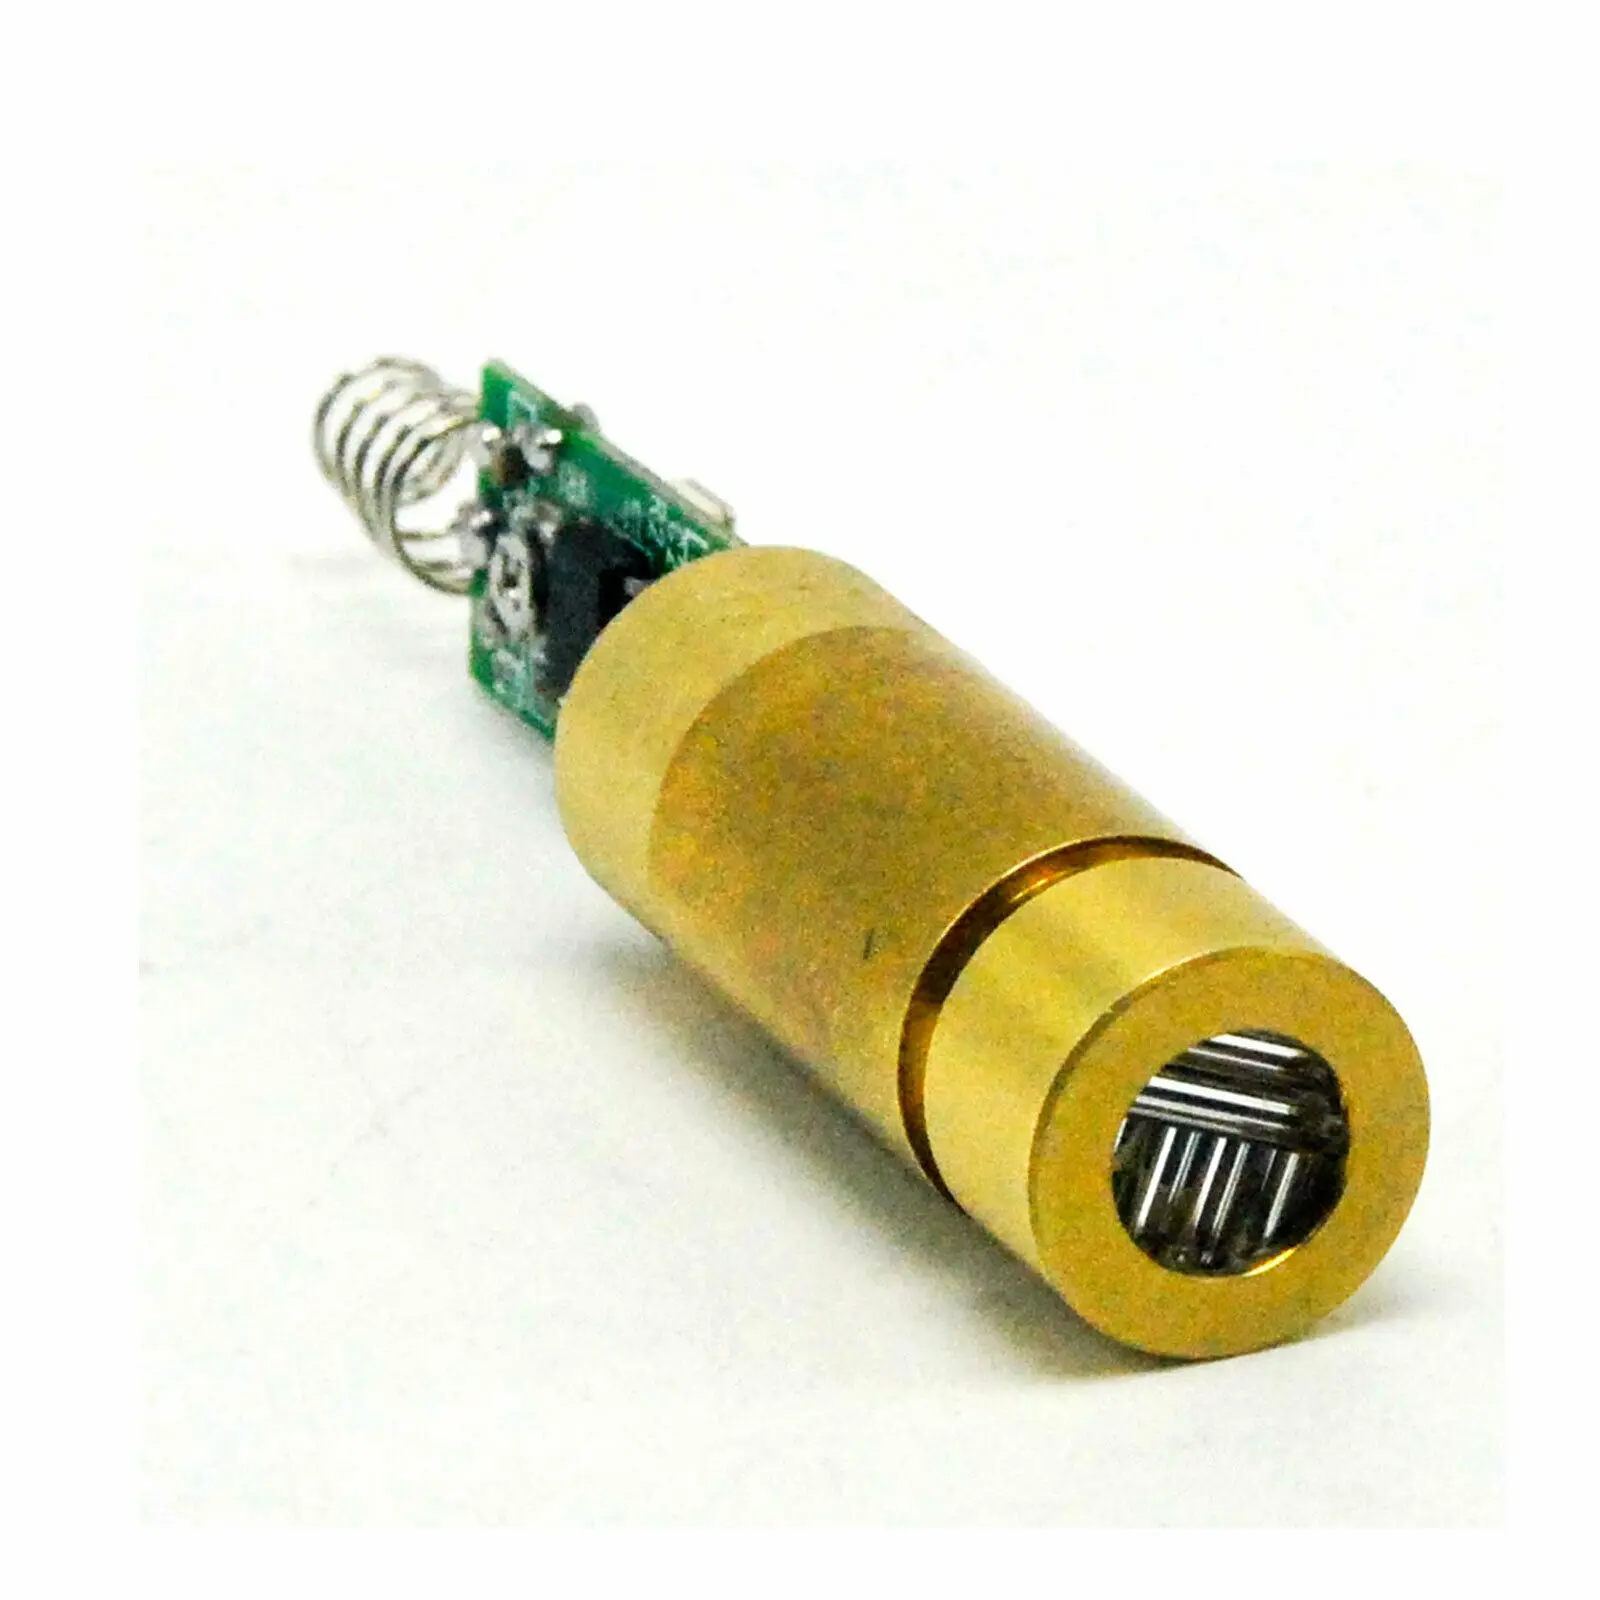 Brass 650nm 100mW Red Laser Cross Diode Module with Driver INDUSTRIAL / LAB focusable 648nm 650nm 50mw 100mw ld red laser diode module dot line cross 16x120mm with adapter